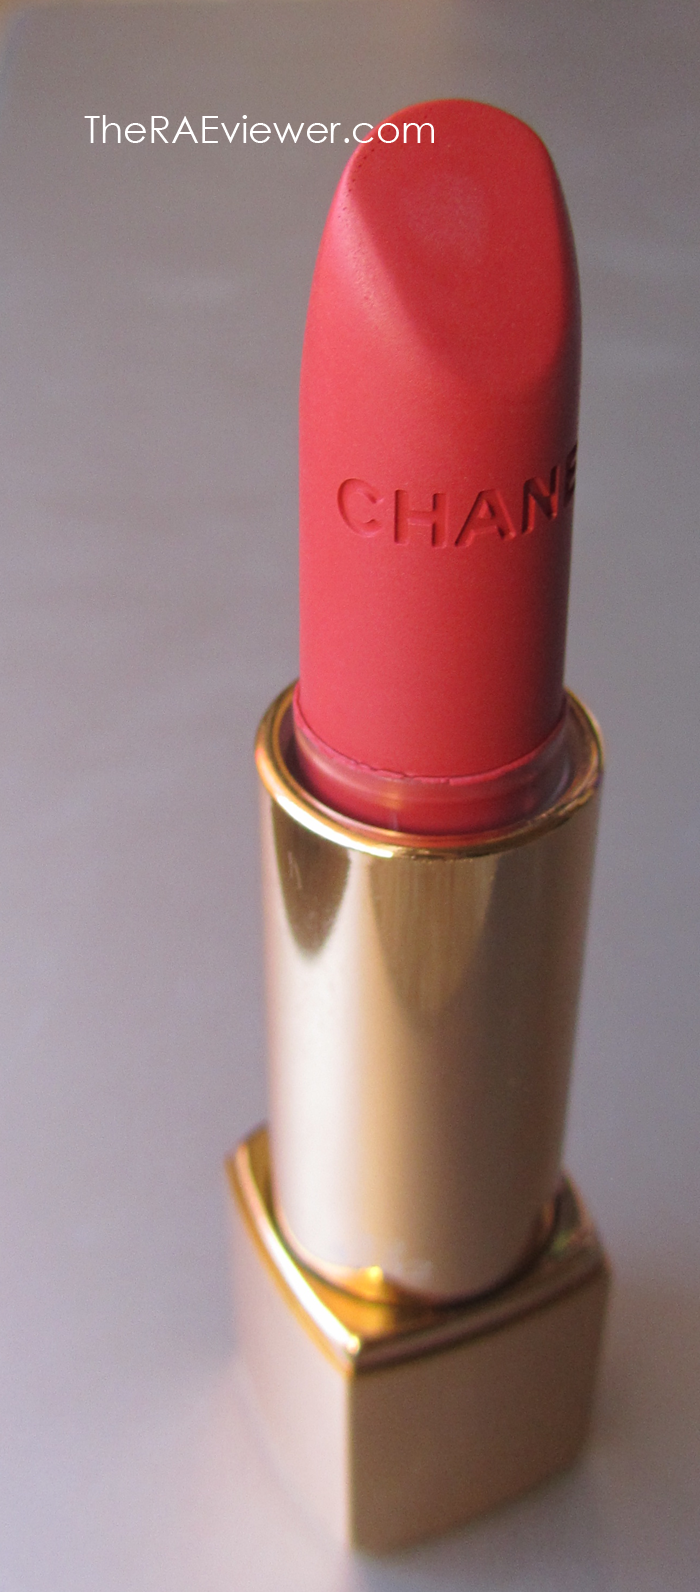 Chanel Rouge Allure Lipstick, Beauty & Personal Care, Face, Makeup